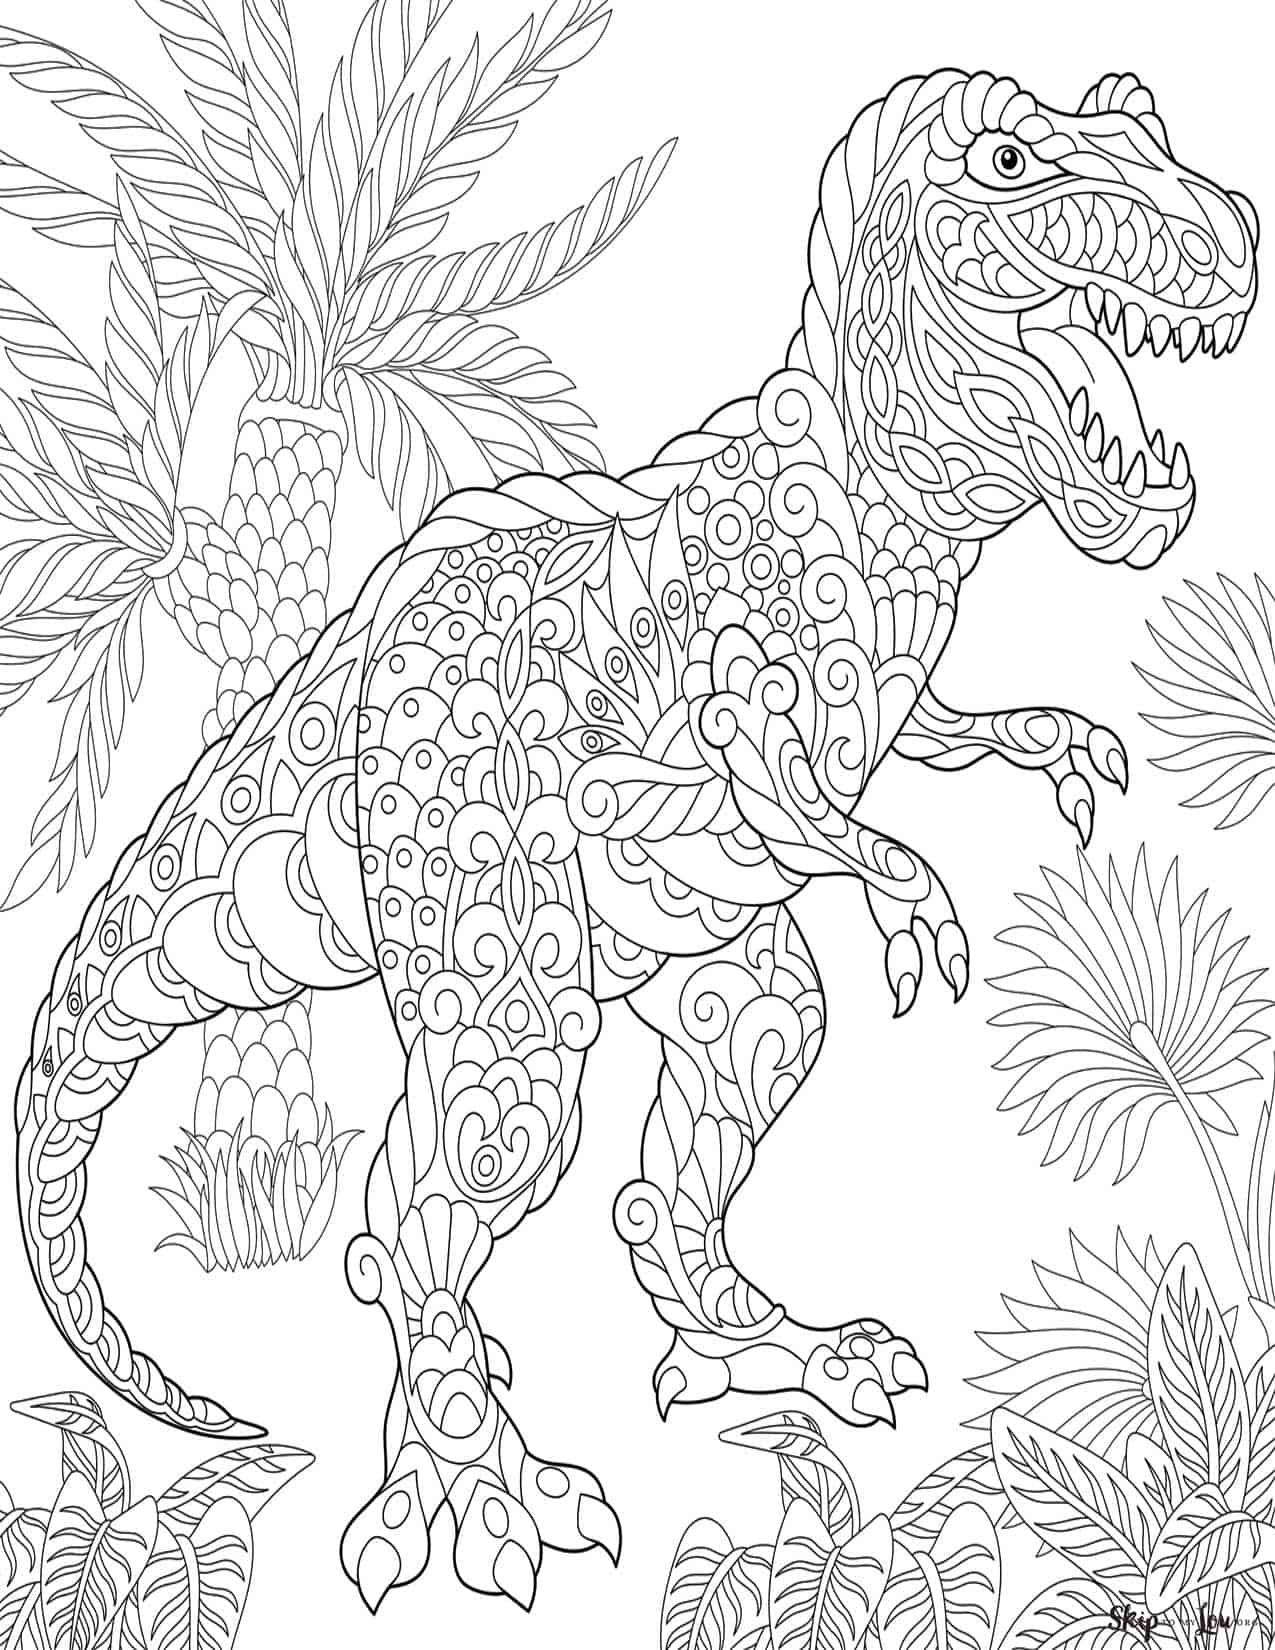 30 Dinosaur Coloring Pages Hard 1